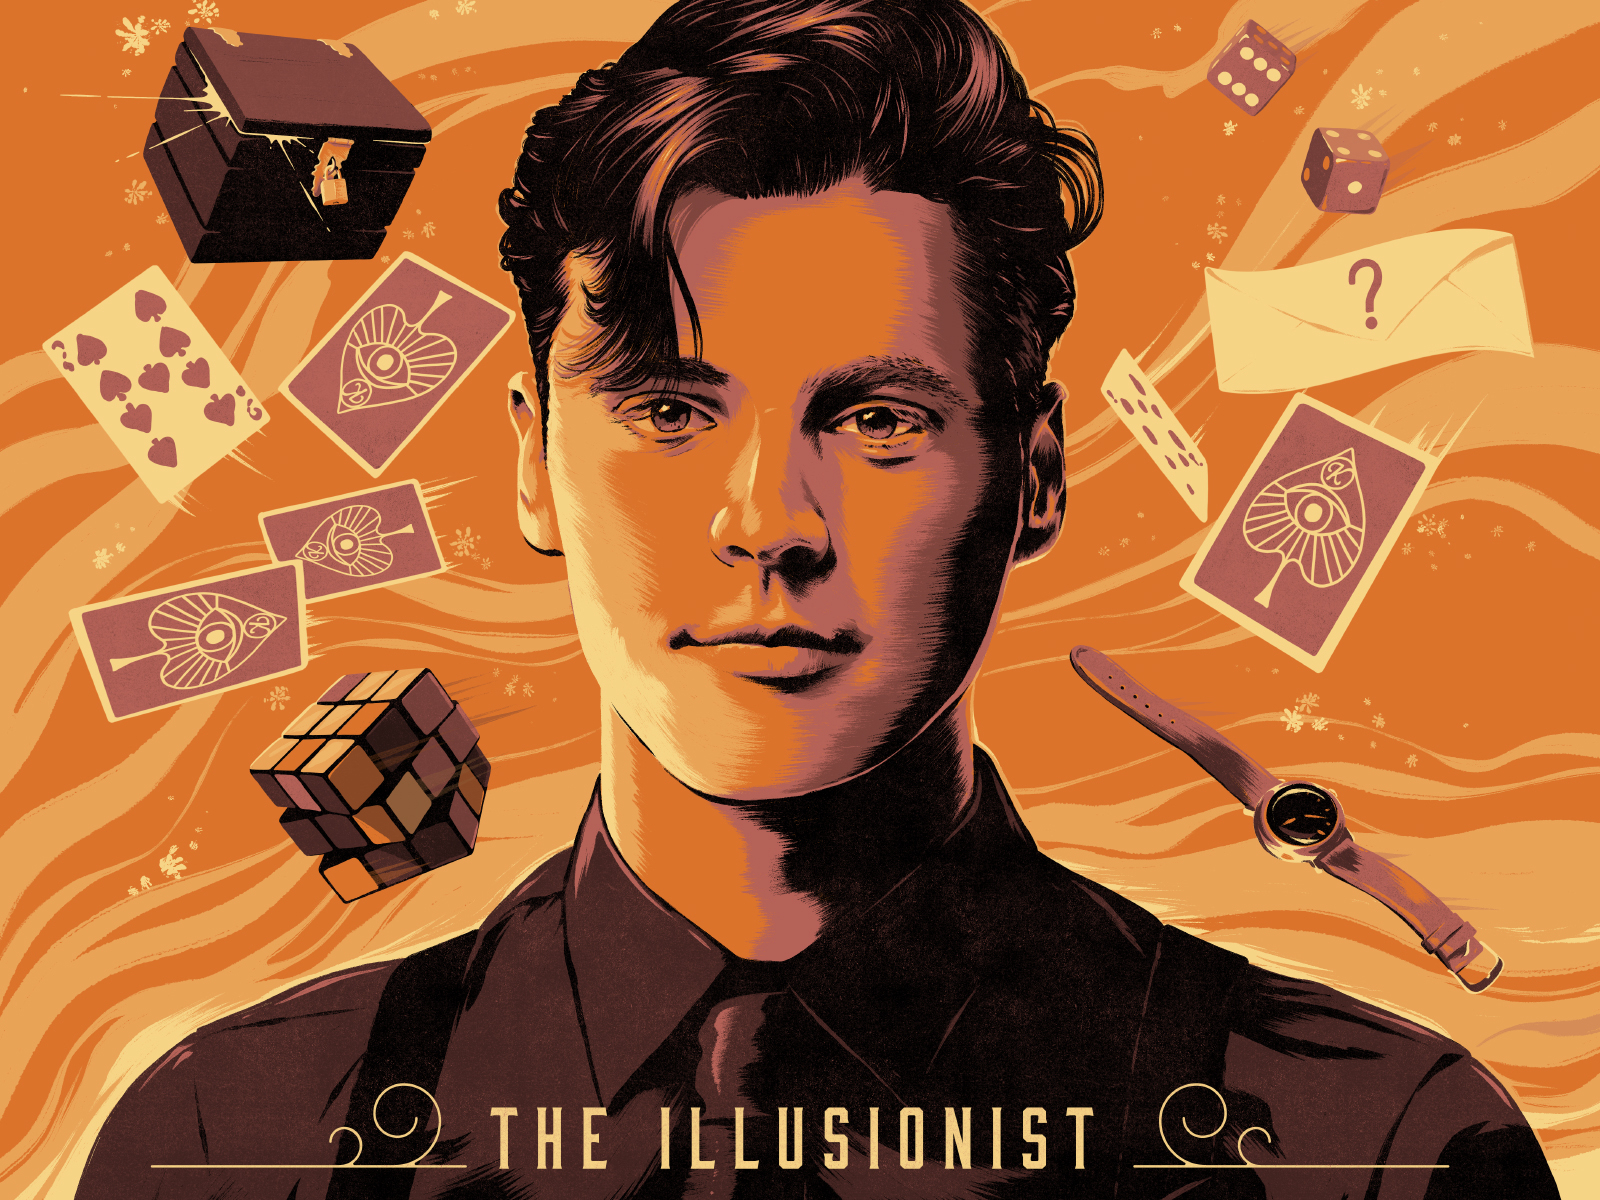 The Illusionist Kevin Blake Poster by Matthew Fleming on Dribbble